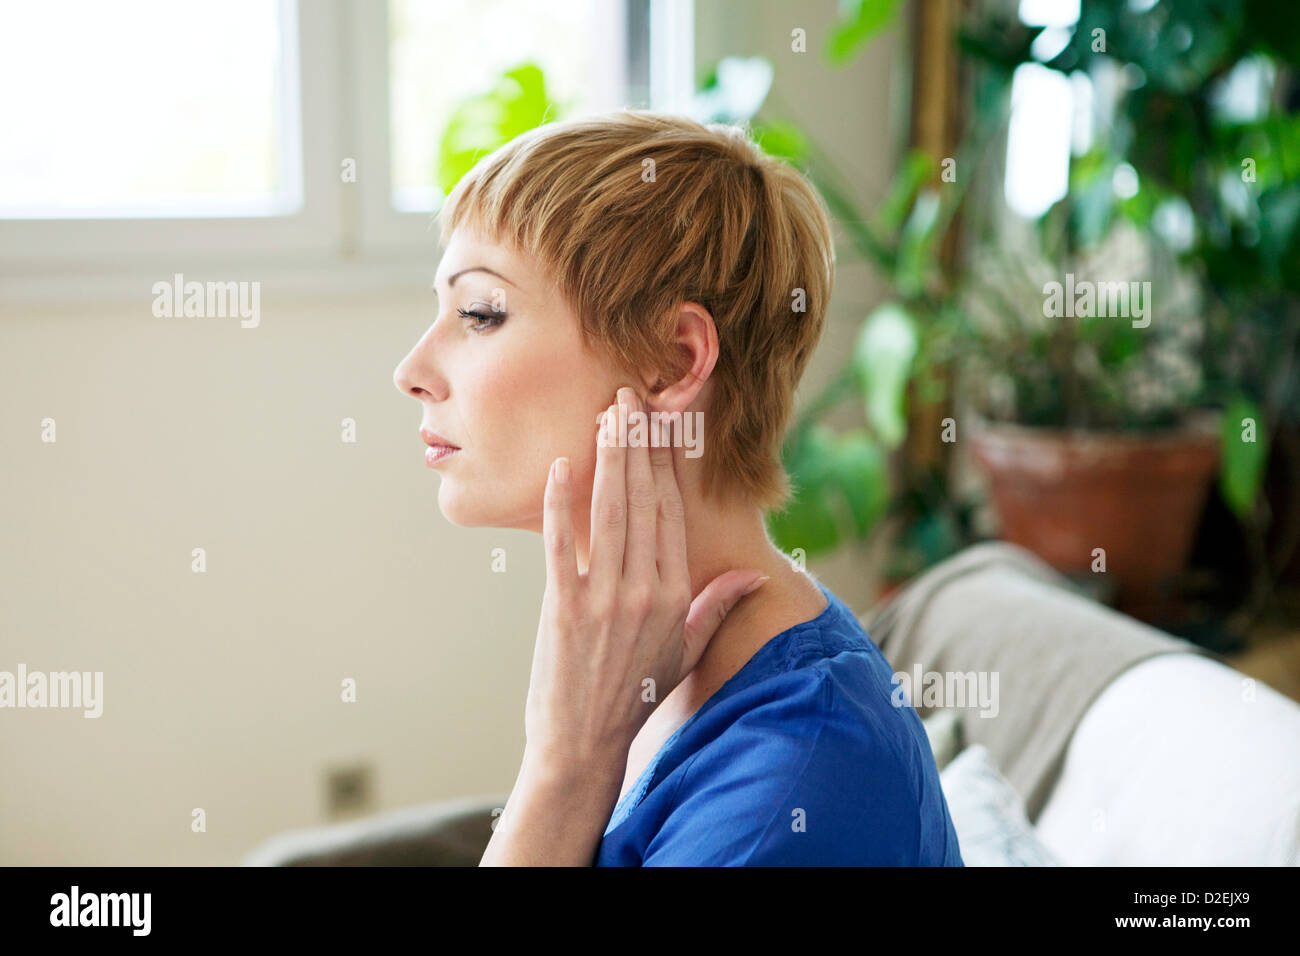 EAR PAIN IN A WOMAN Stock Photo